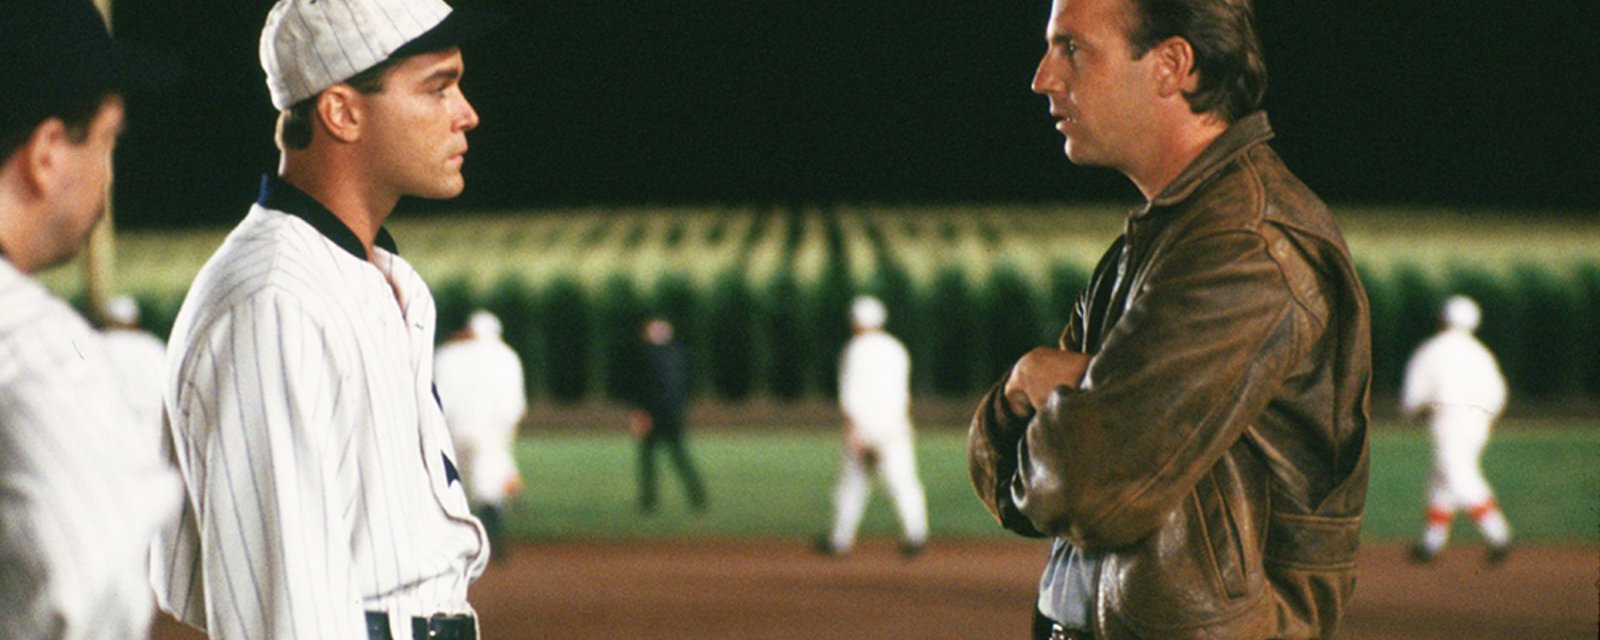 The Field of Dreams cornfield will host an MLB game!